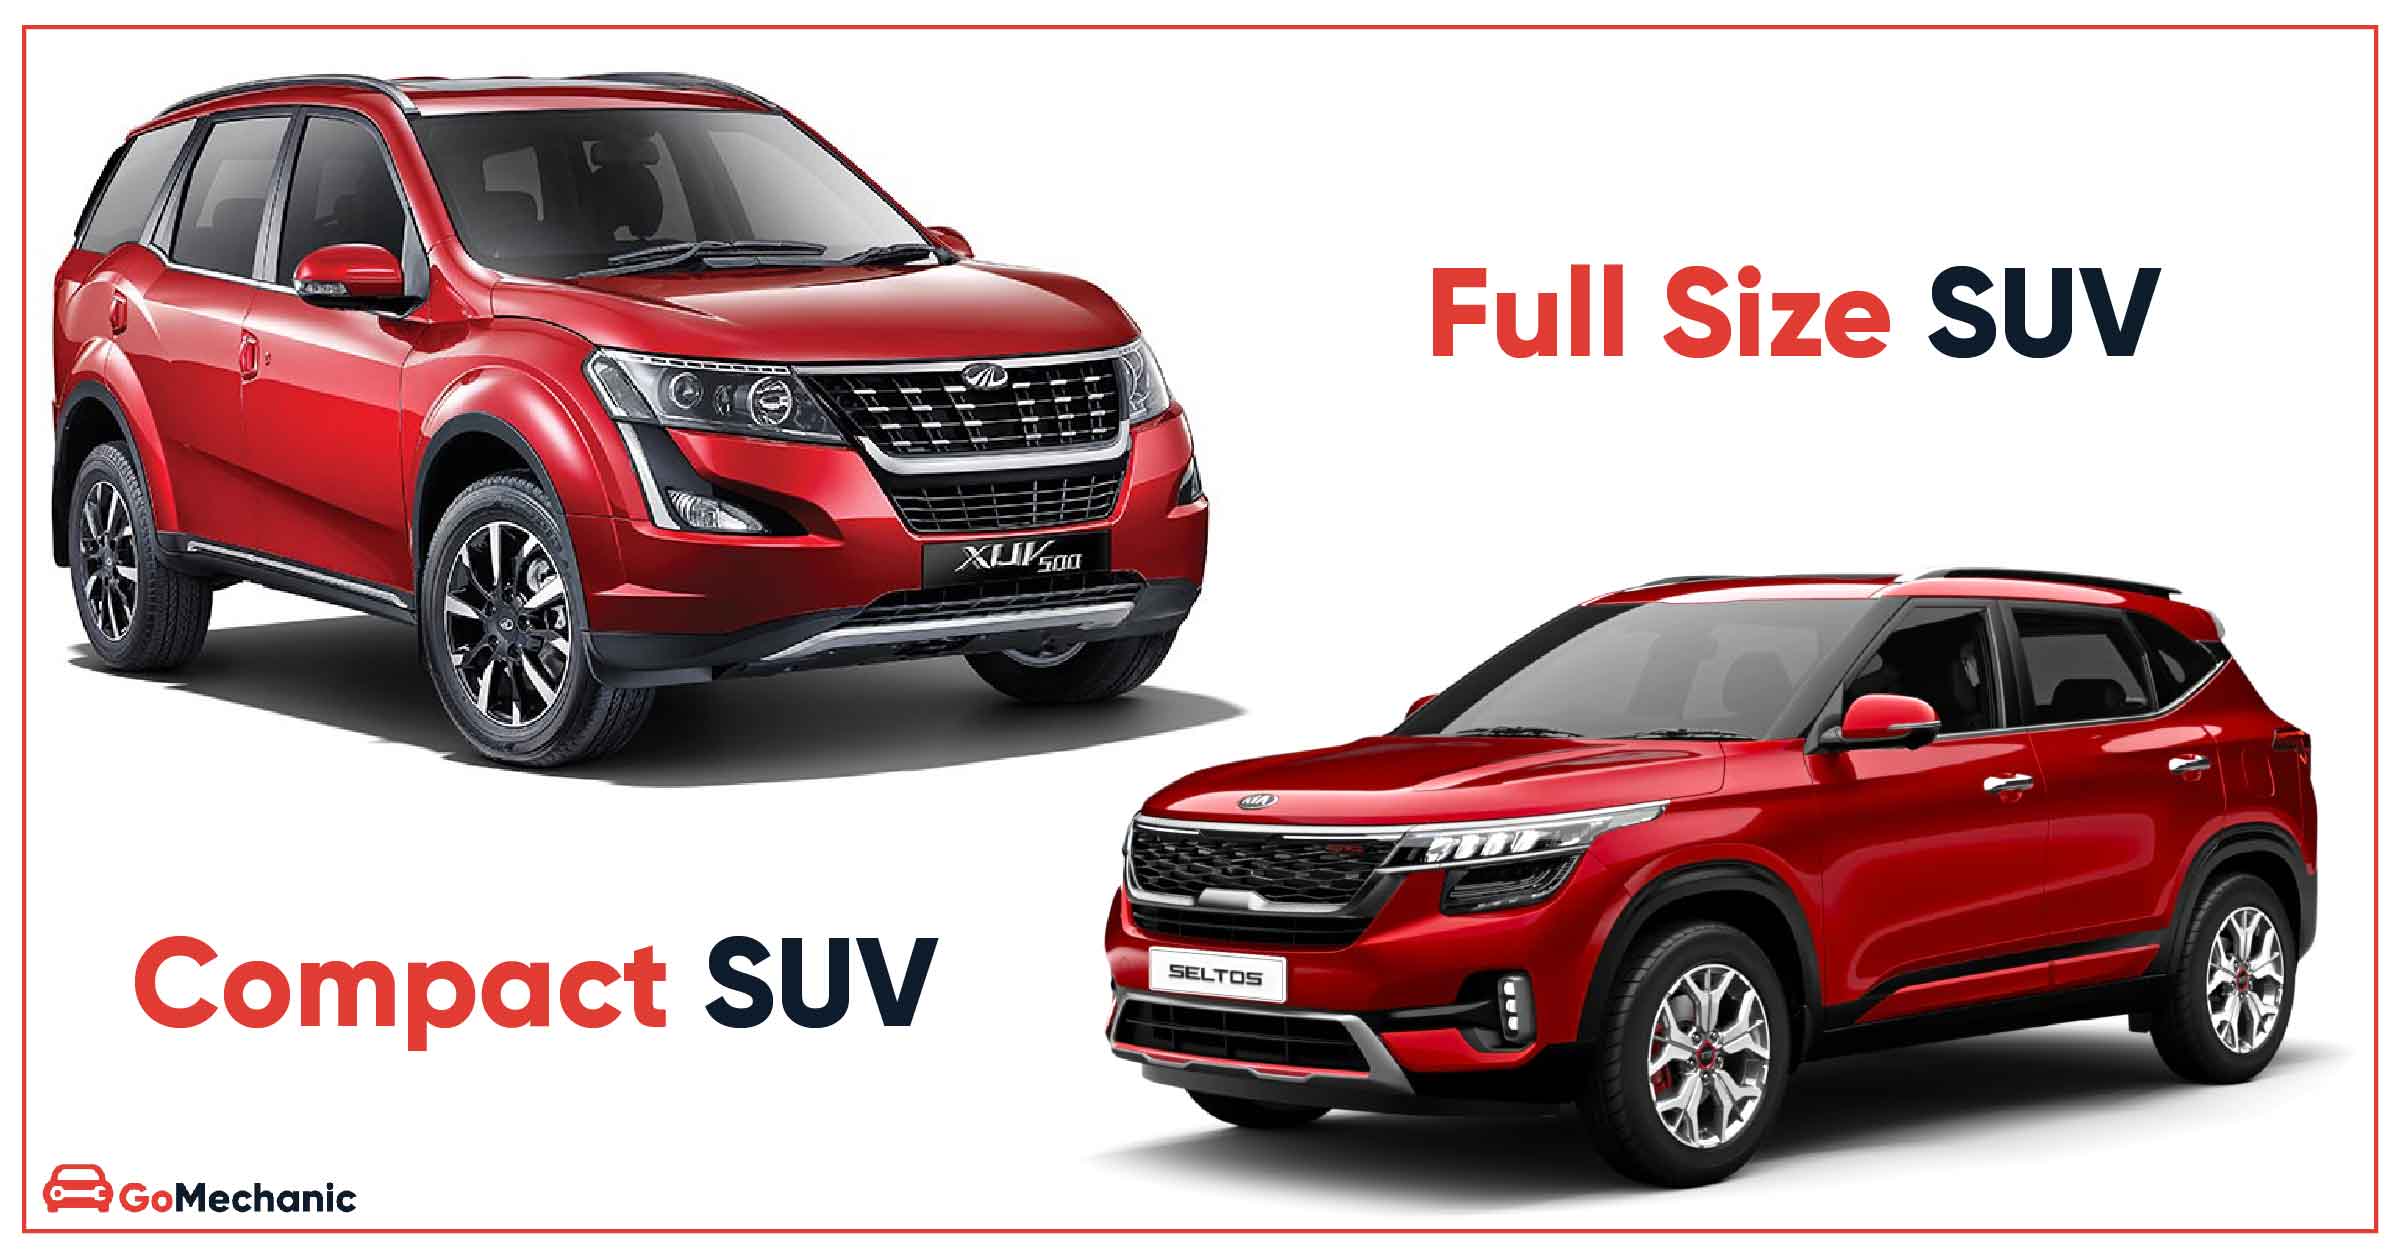 what's the difference between sport utility vehicle (SUV) and